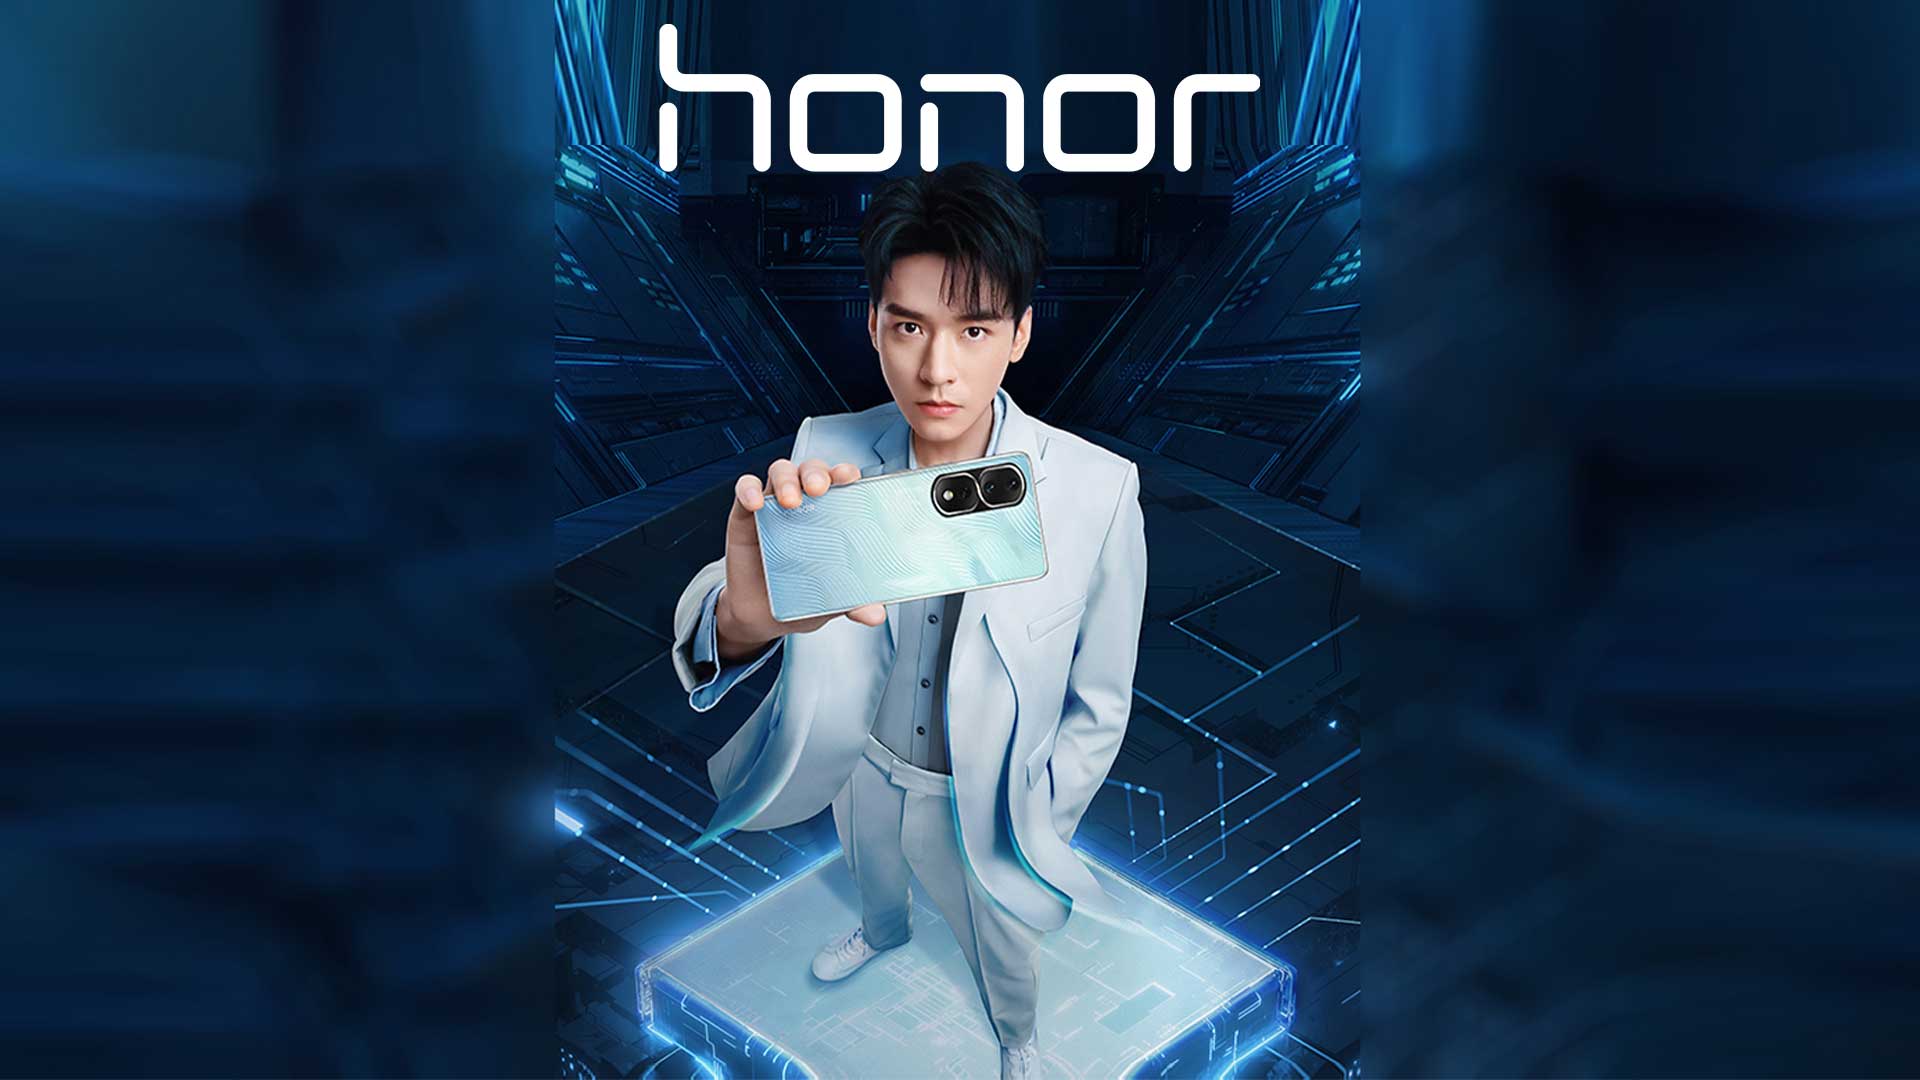 Honor-80-to-bring-new-Snapdragon-782G-chipset